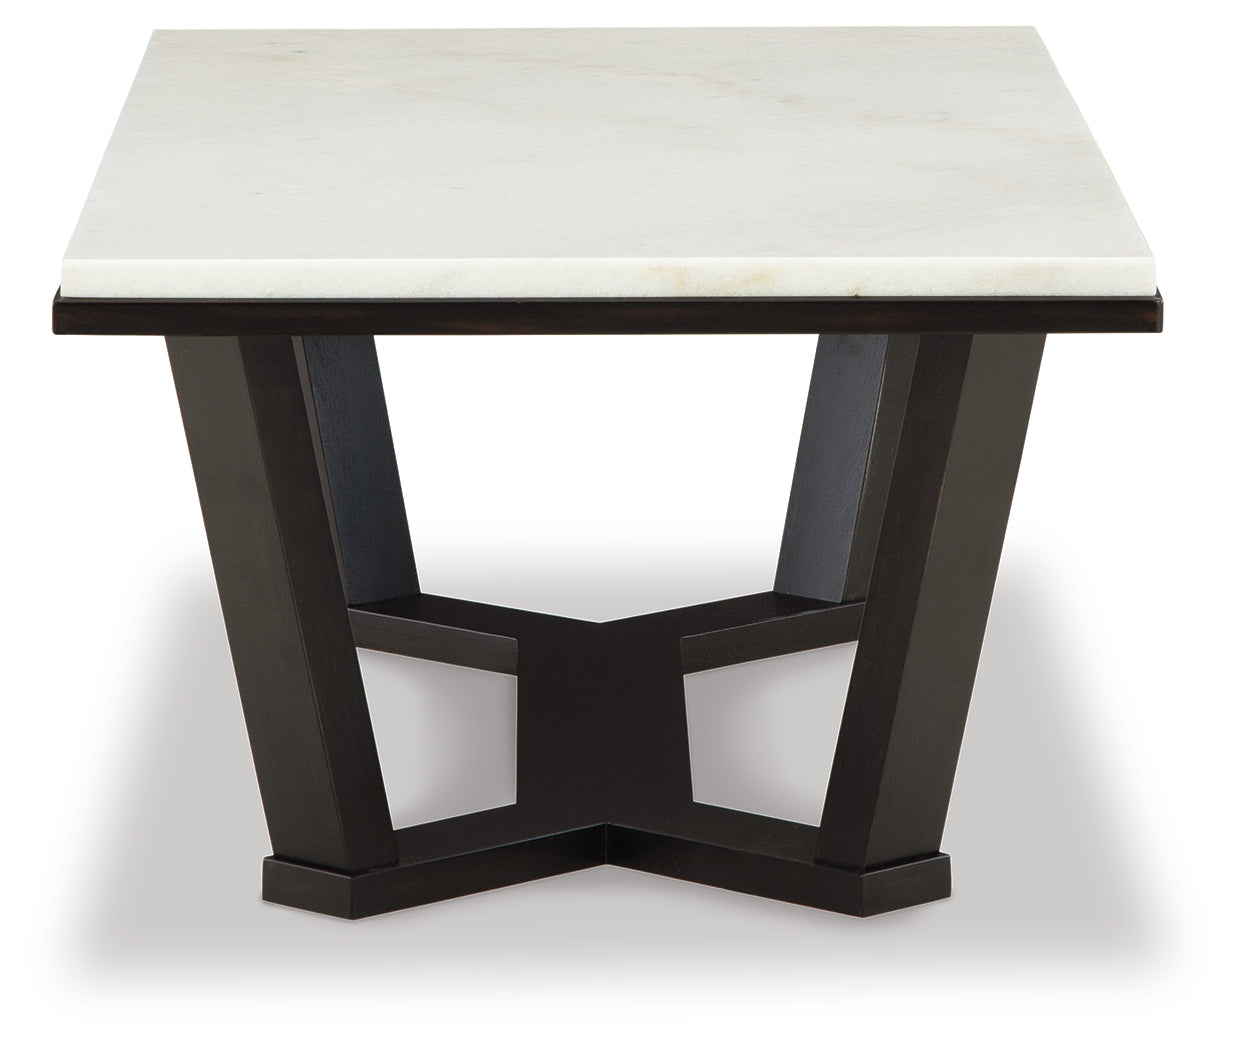 Fostead White/Espresso Coffee Table and 2 Ends